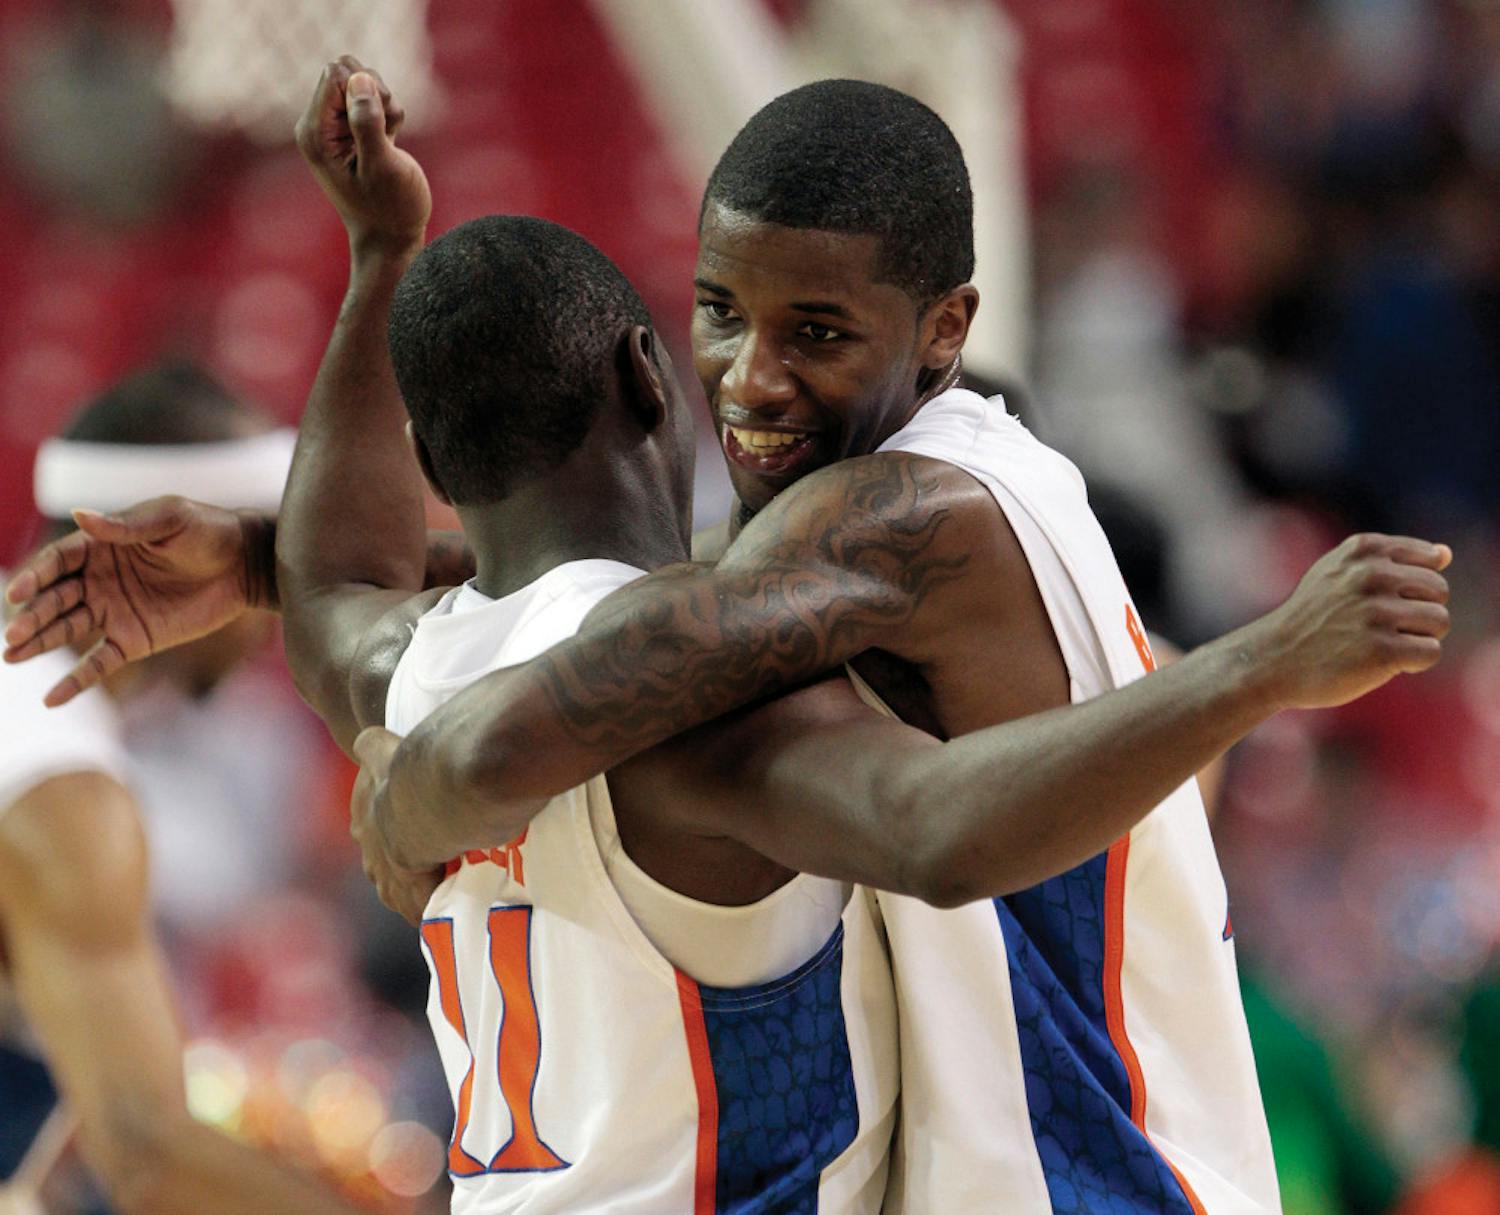 Florida guard Kenny Boynton, right, embraces Florida guard Erving Walker (11) after the Gators defeated Vanderbilt 77-66 in an NCAA college basketball game at the Southeastern Conference tournament, Saturday, March 12, 2011, in Atlanta.